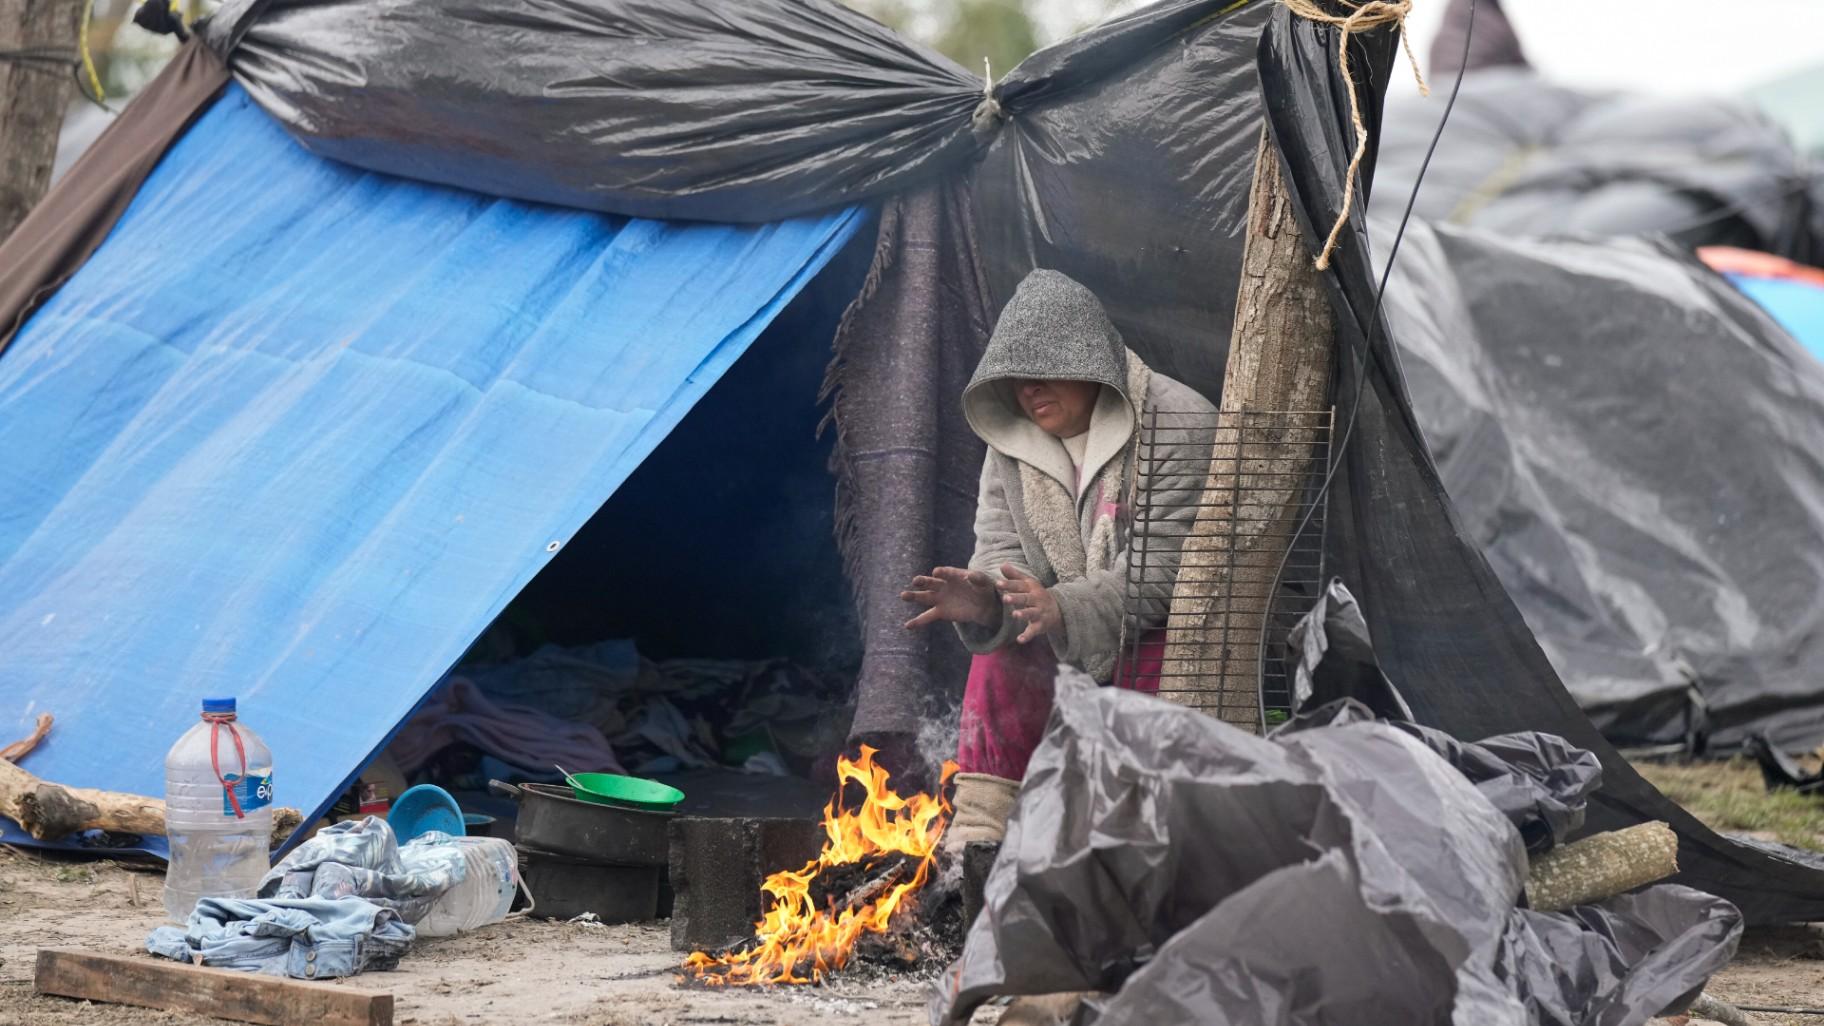 A Venezuelan migrant warms her hands over a campfire outside her makeshift tent refusing to be relocated to a refugee shelter, in Matamoros, Mexico, Friday, Dec. 23, 2022. (AP Photo / Fernando Llano)